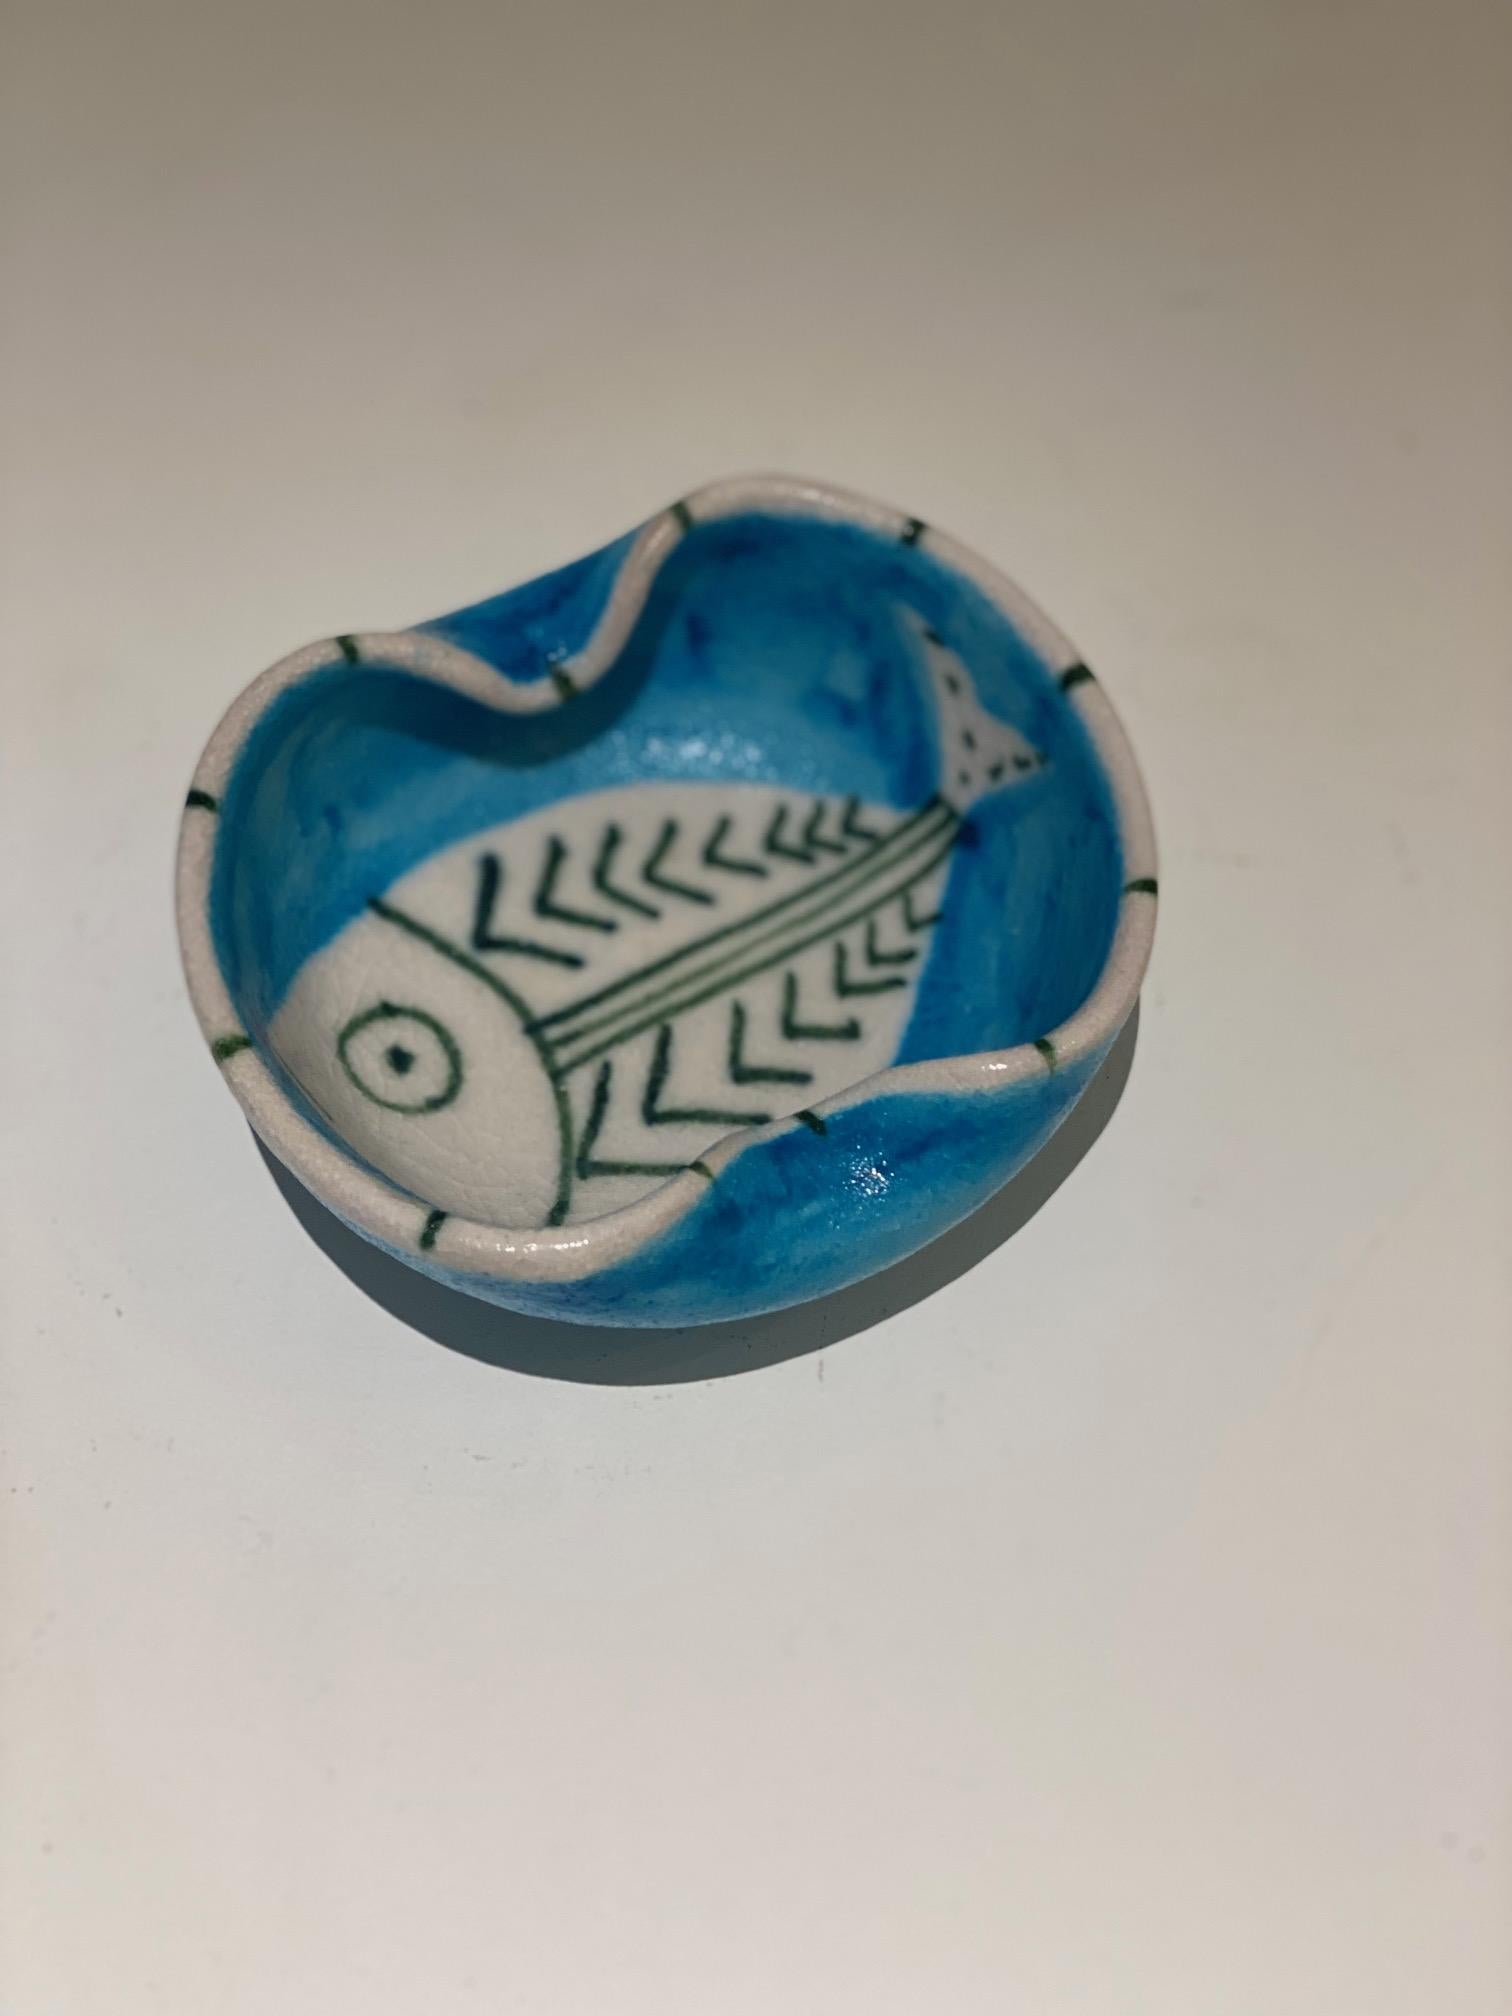 Guido Gambone (1909-1969)
Fish hand painted decor on blue glazed ceramic small cup .
Signed Gambone, Italy with donkey mark.
Guido Gambone was one of the best known leaders of the Italian midcentury modernist ceramics movement.
 